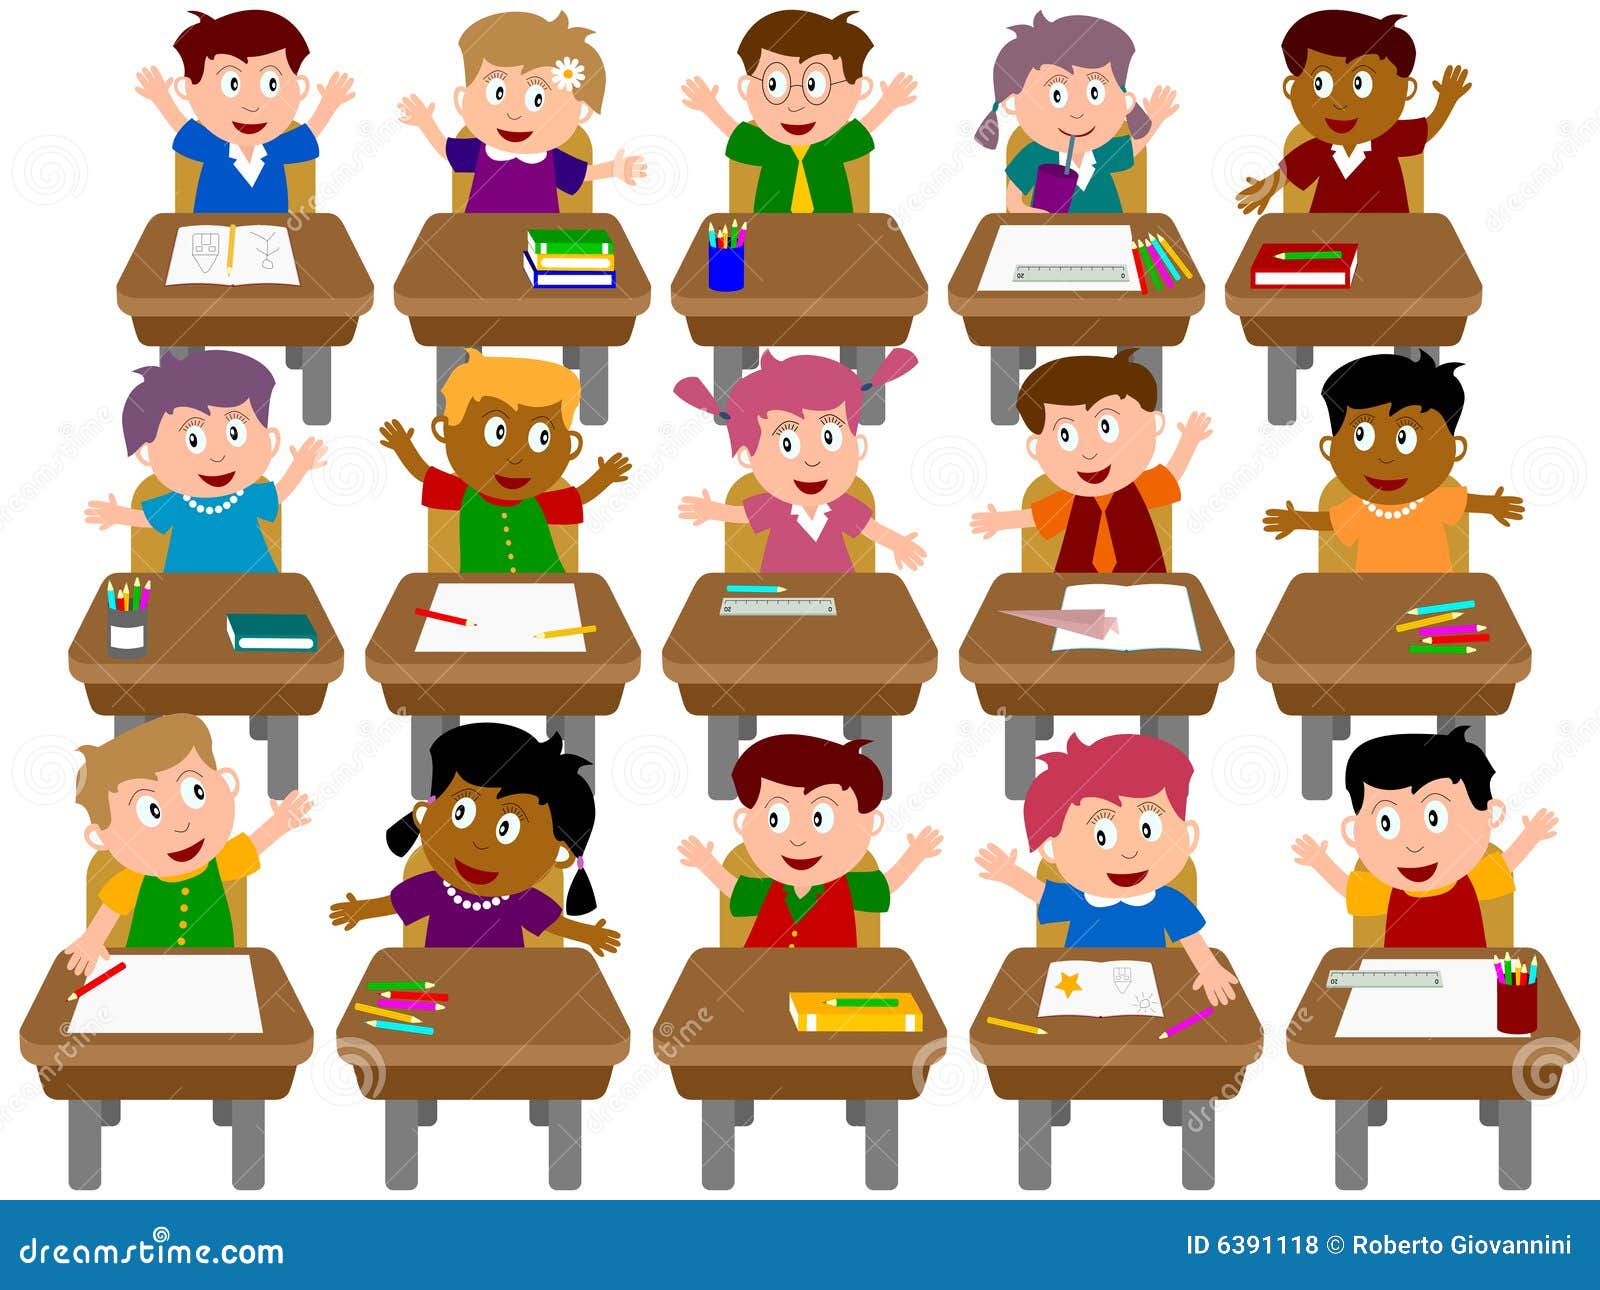 classroom objects clipart - photo #43